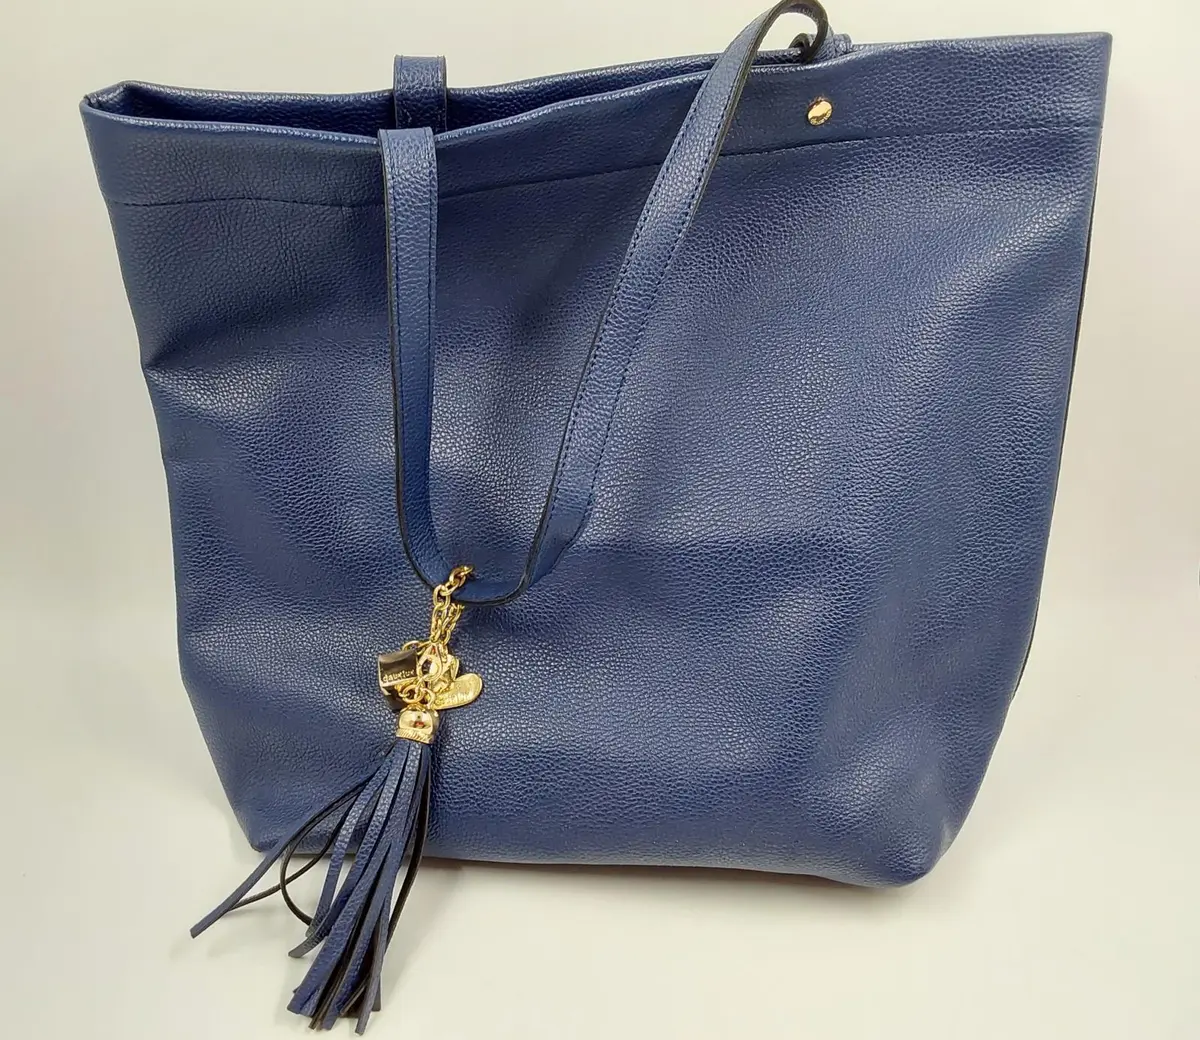 Deux Lux Navy Blue Tote Bag With Matching Charms - Used